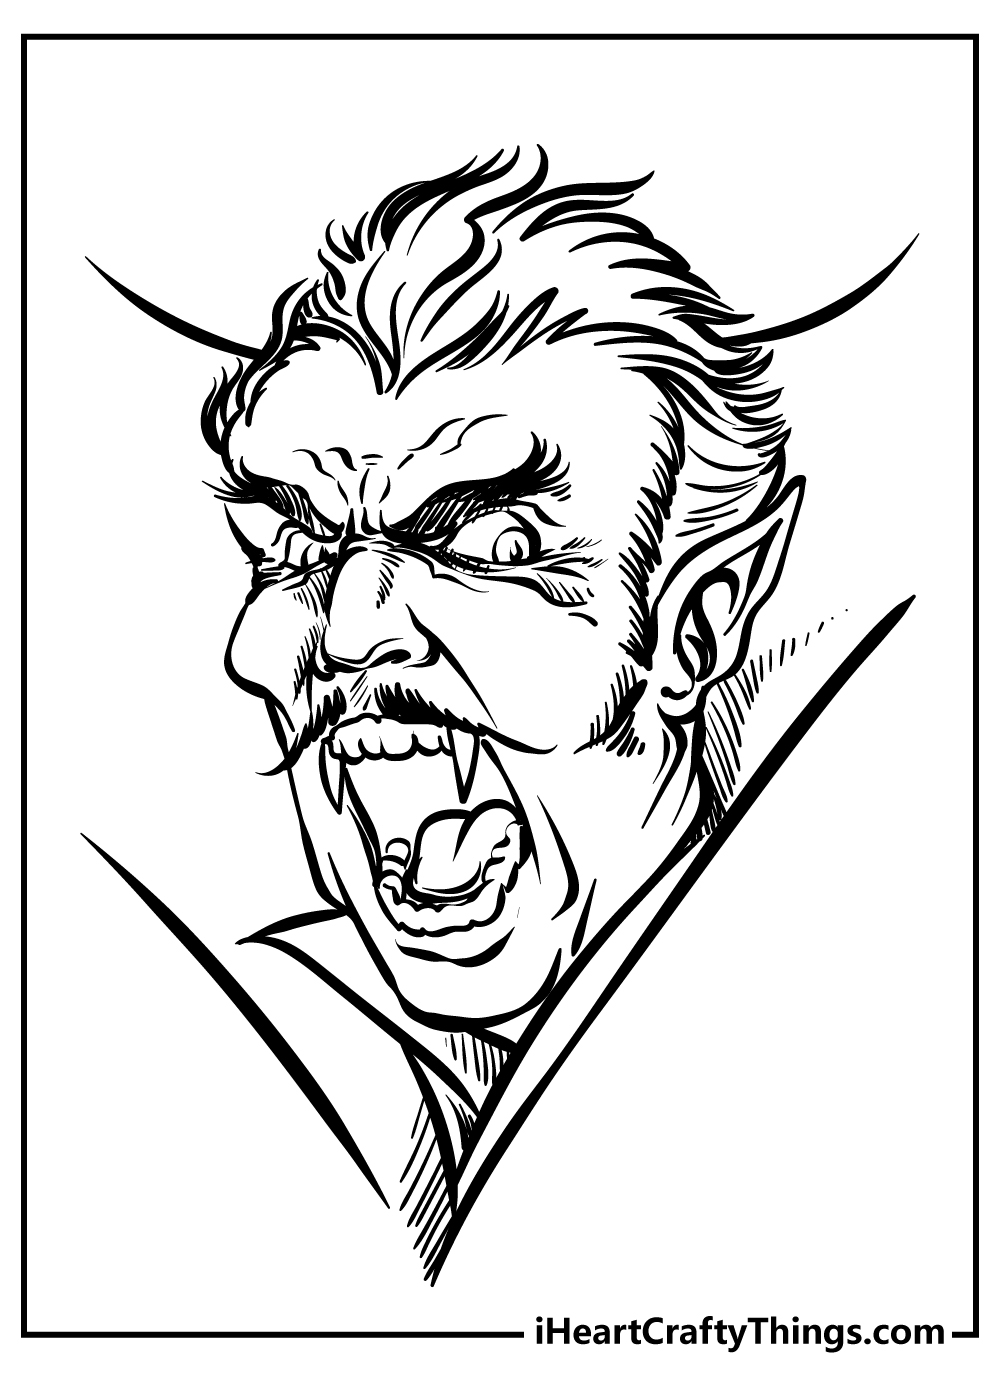 Count Dracula Coloring Pages for adults free printable